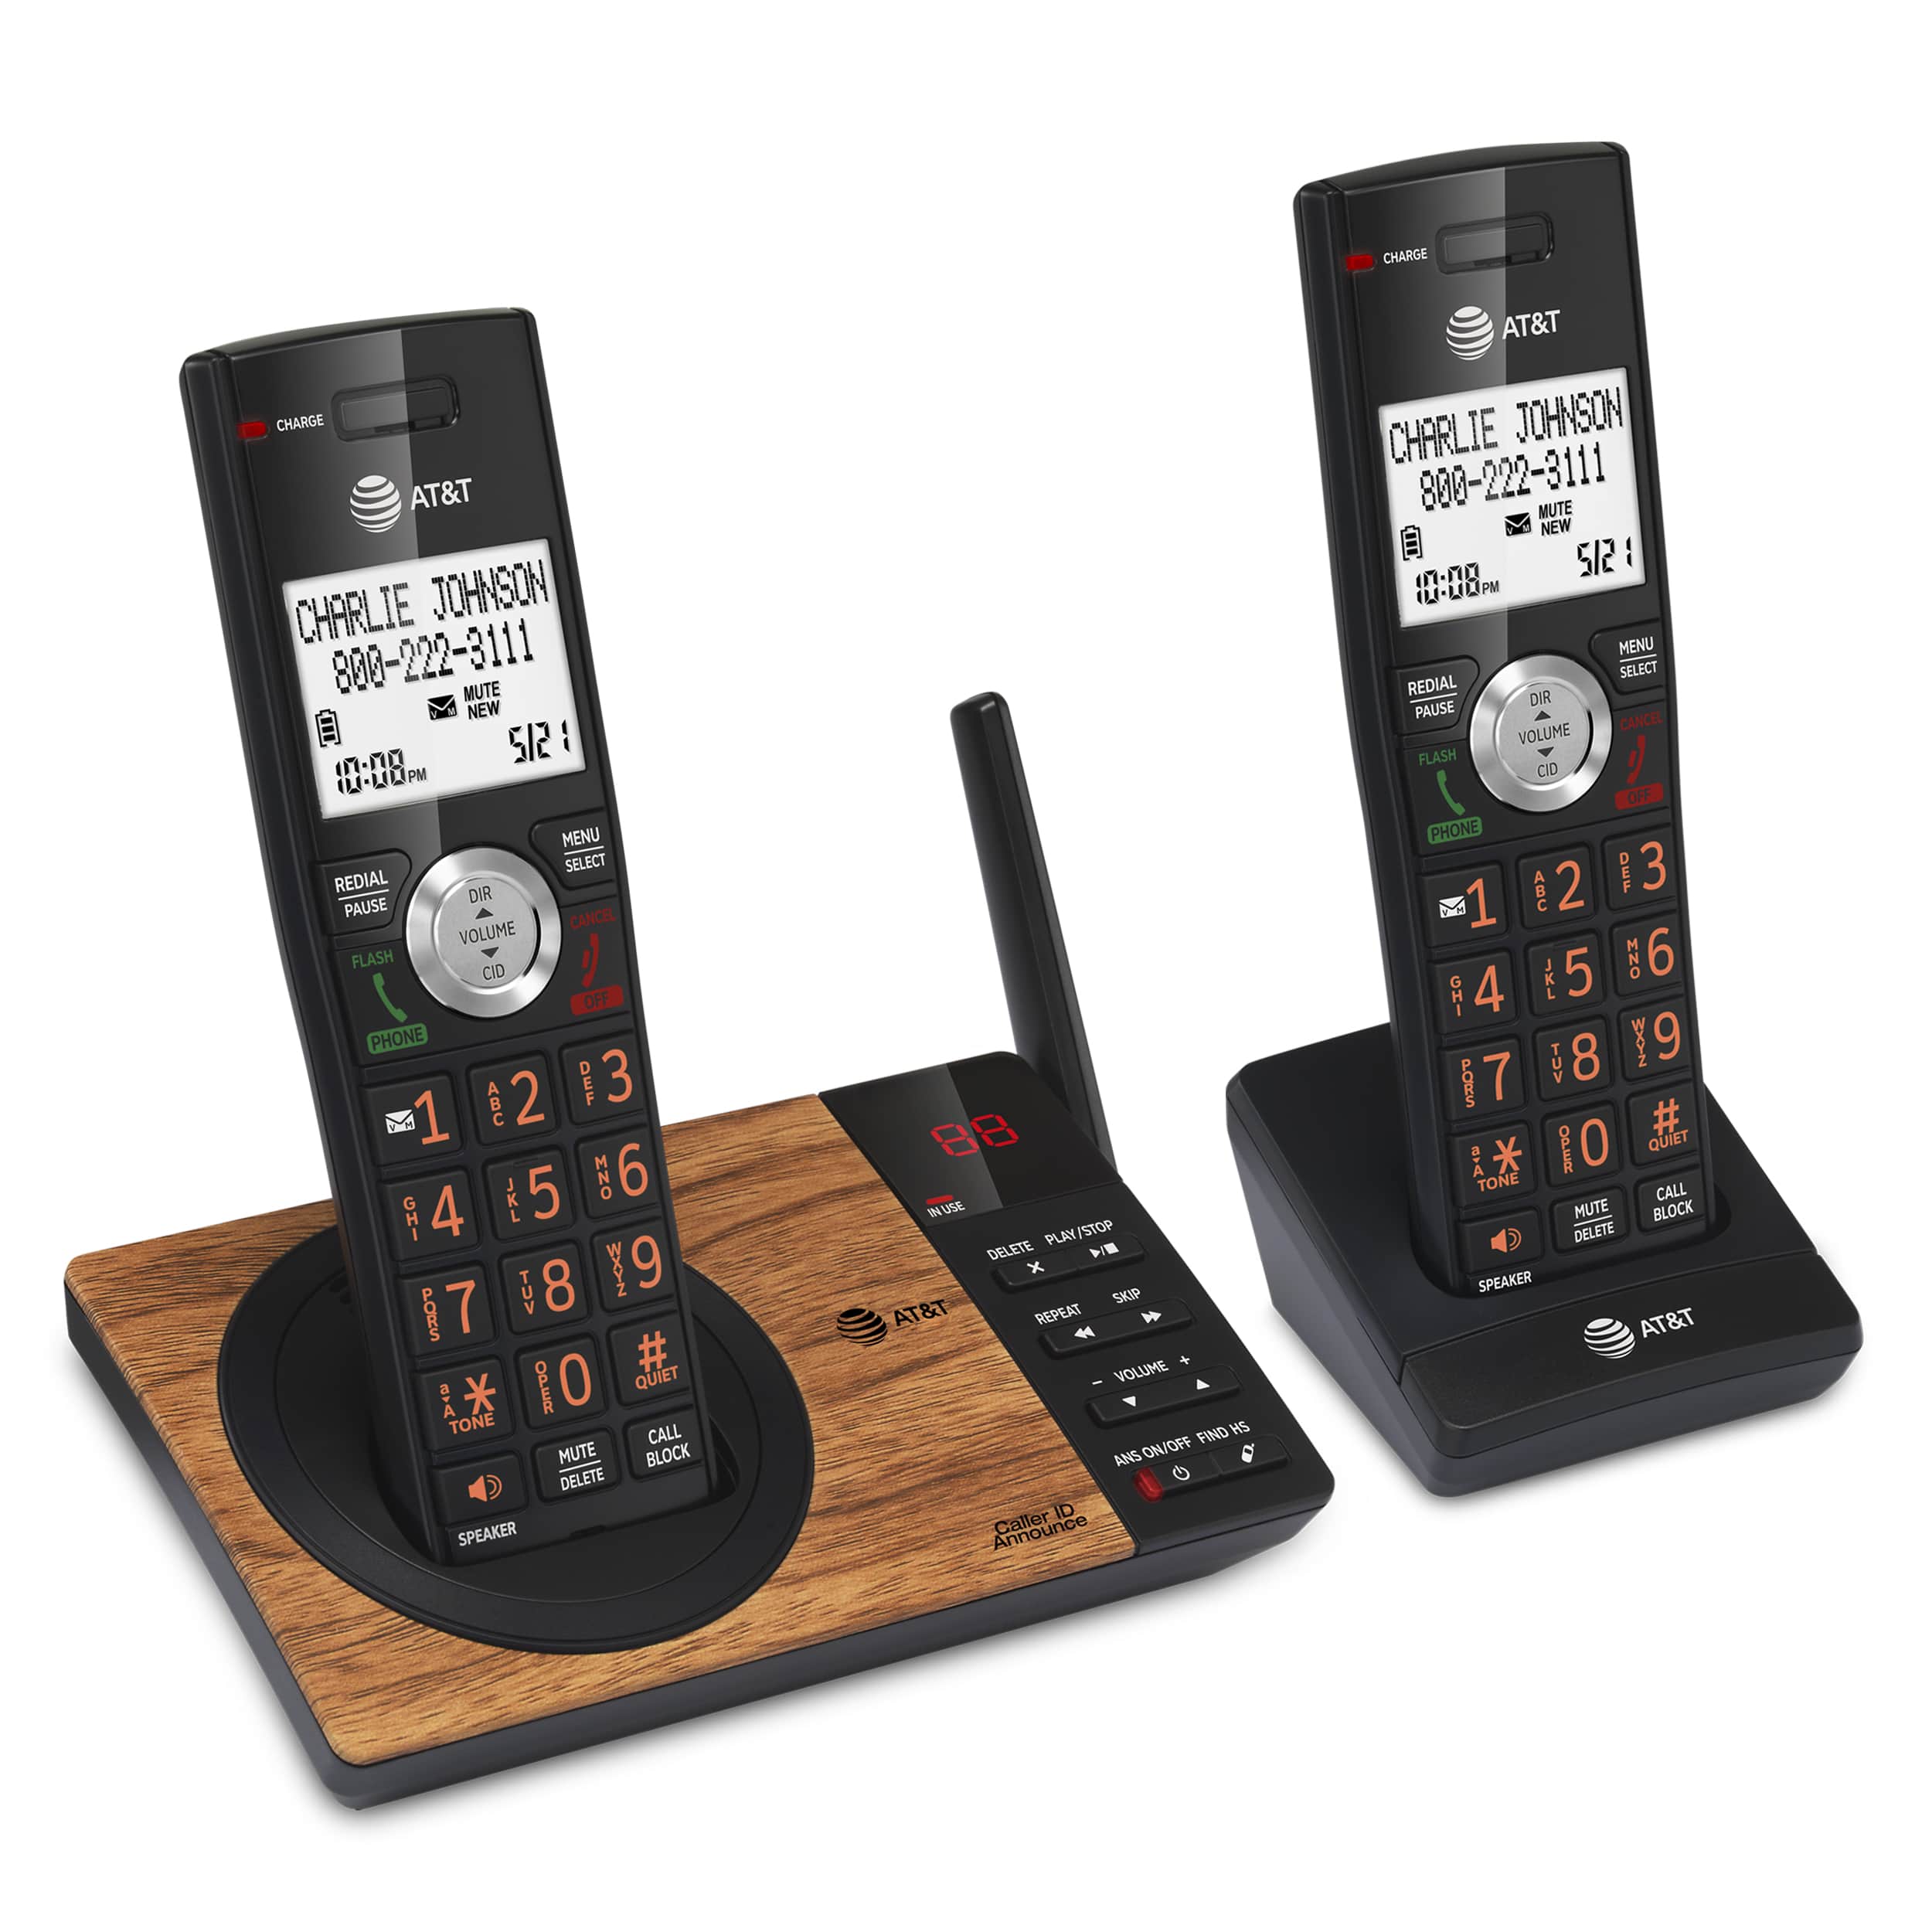 2-Handset Expandable Cordless Phone with Unsurpassed Range, Smart Call Blocker and Answering System - view 2